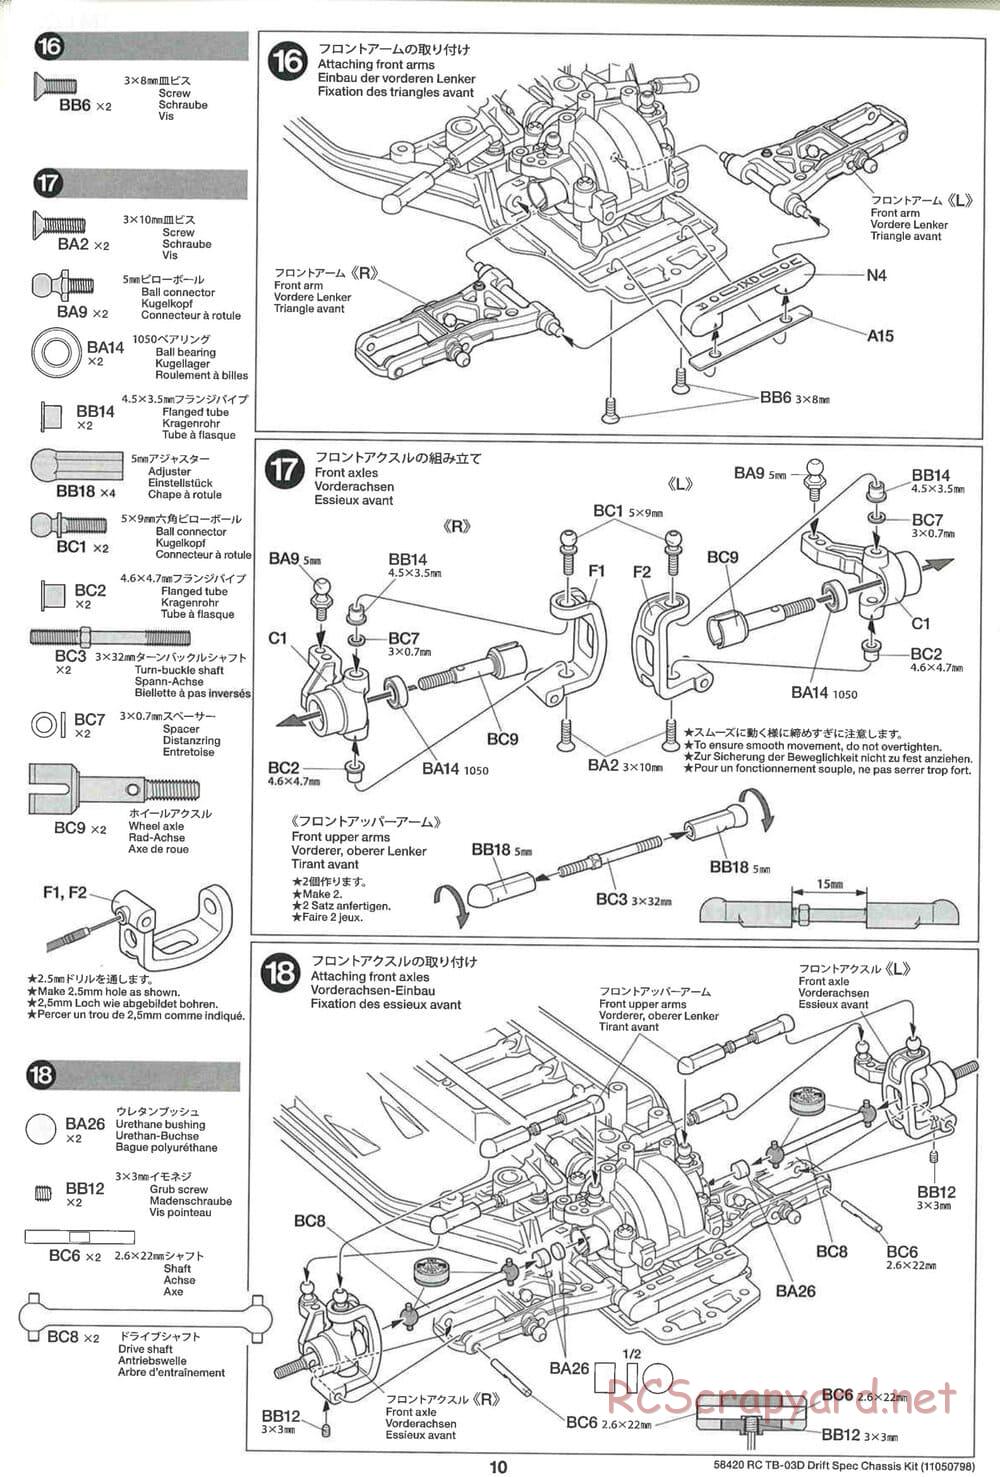 Tamiya - TB-03D HP Drift Spec Chassis - Manual - Page 10